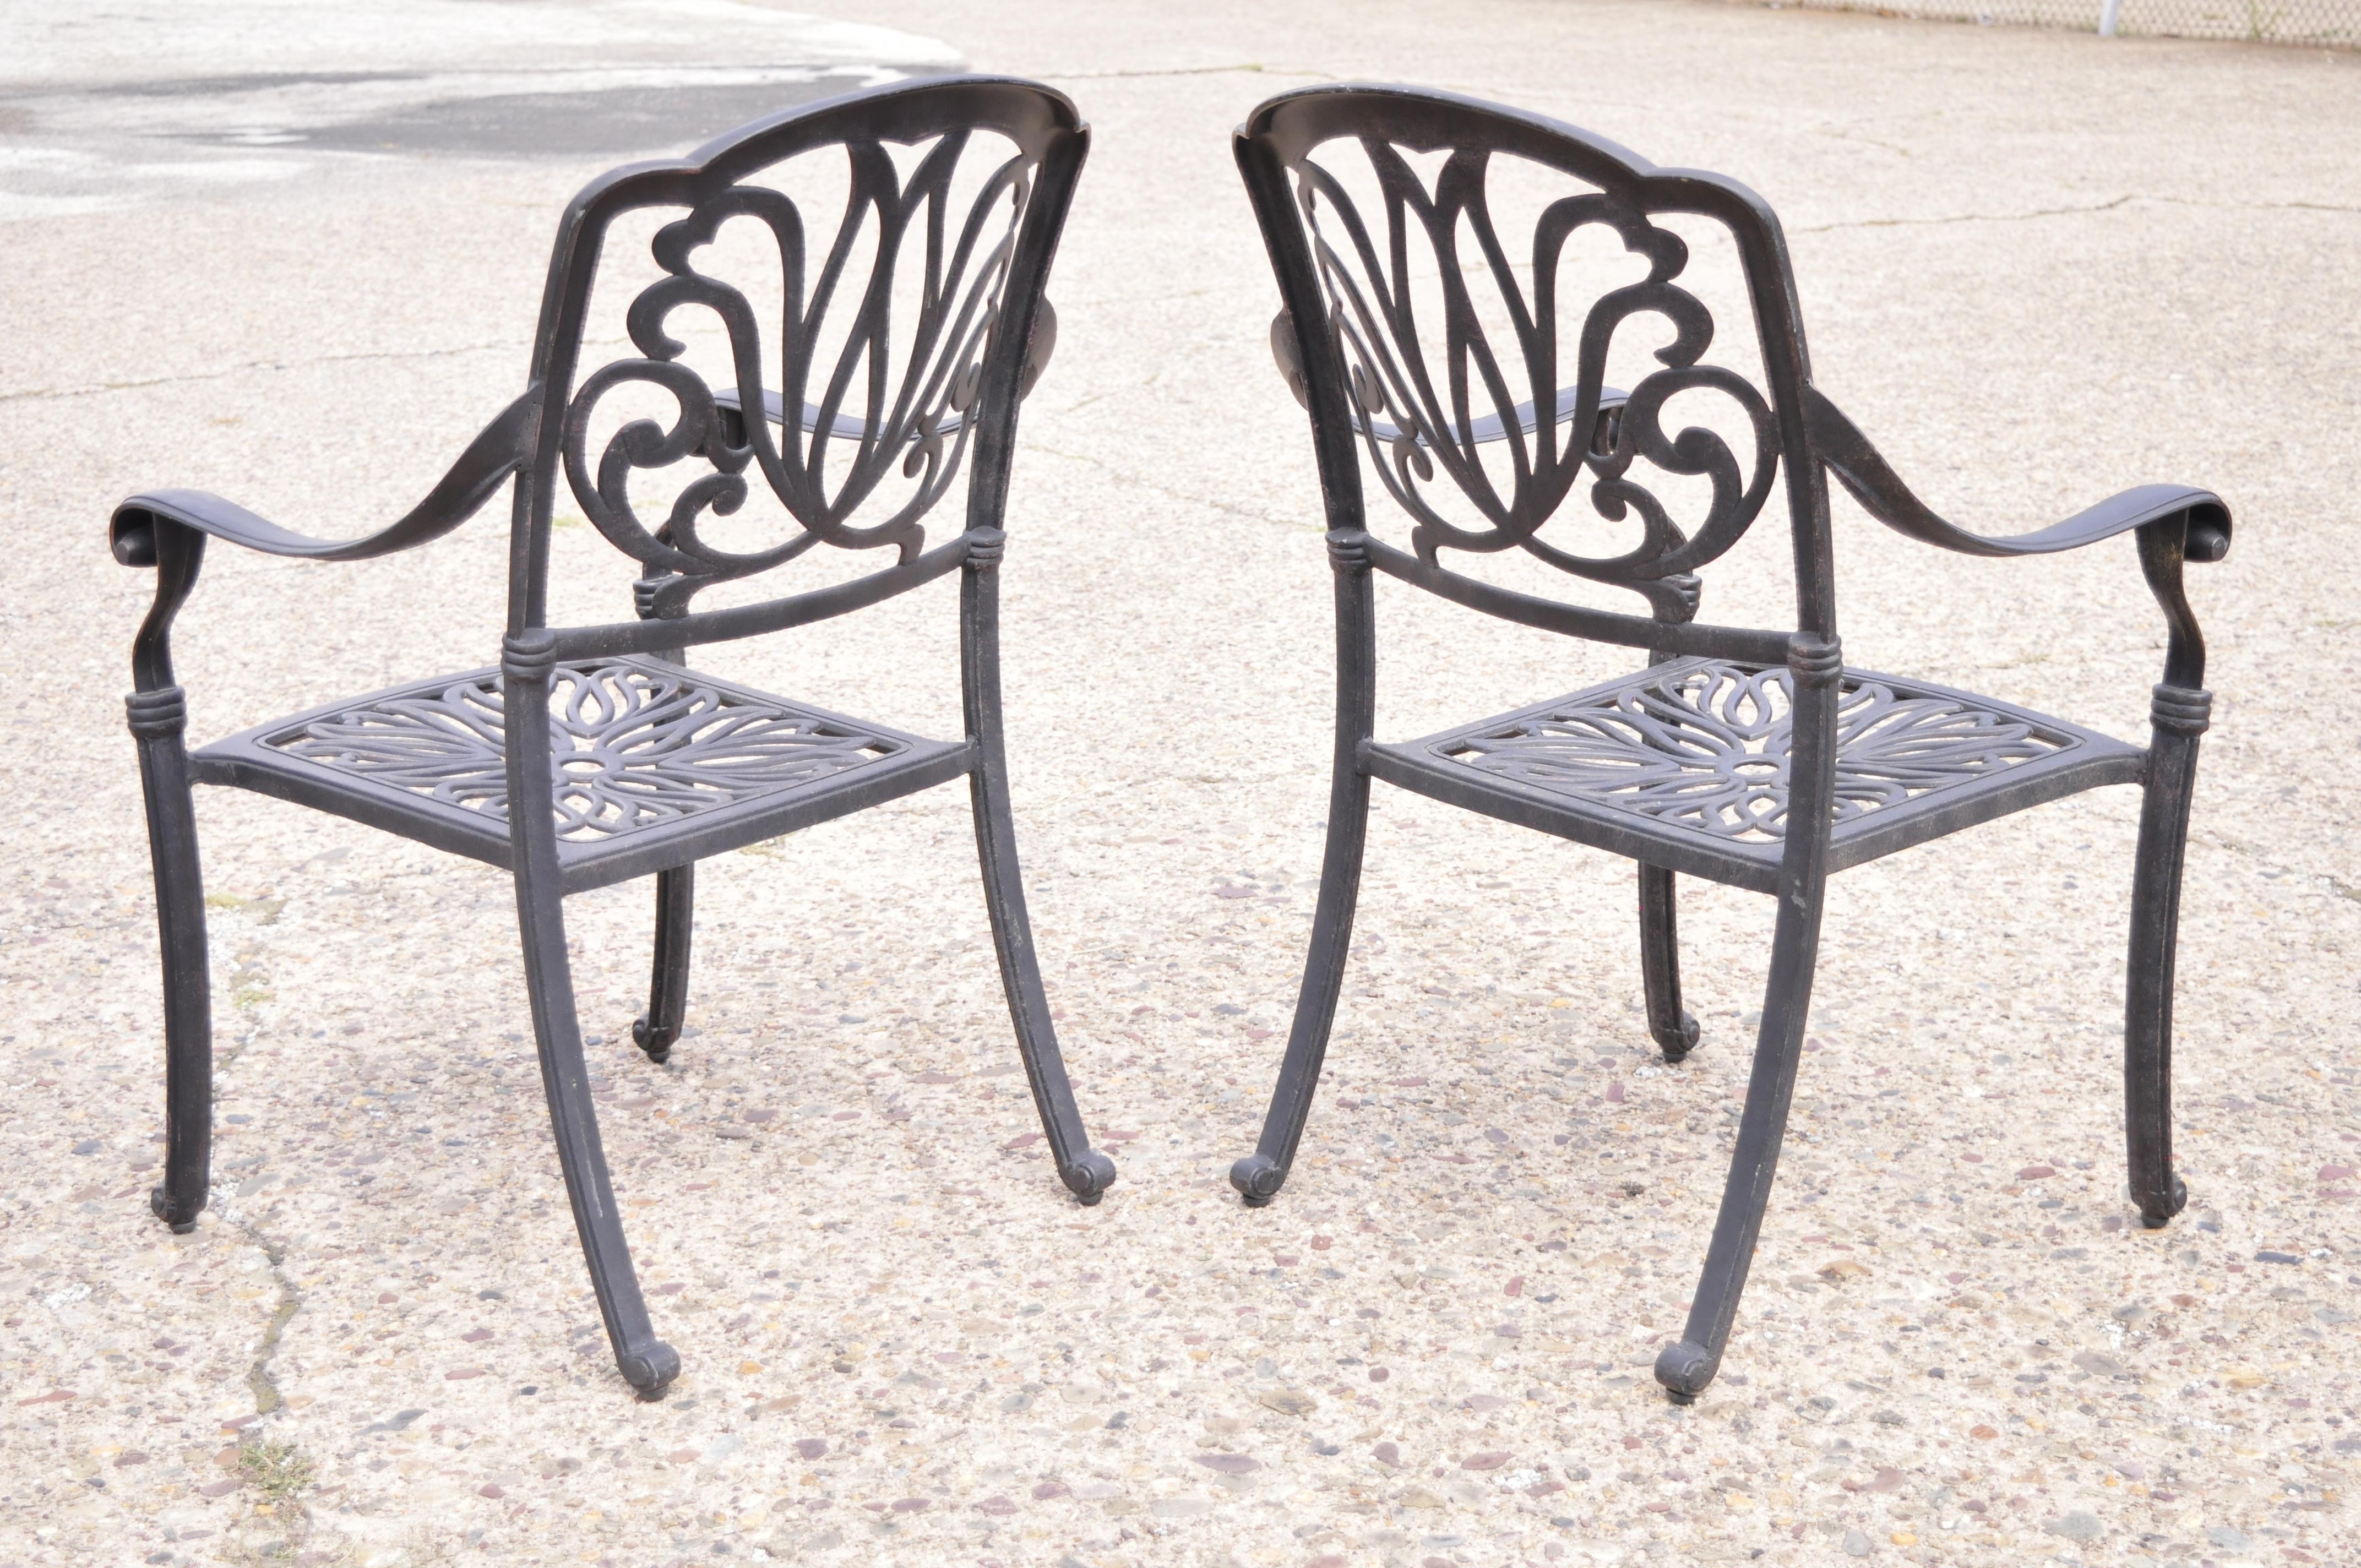 KB Patio Elizabeth Collection Aluminum Garden Patio Dining Arm Chairs - Set of 6 For Sale 4